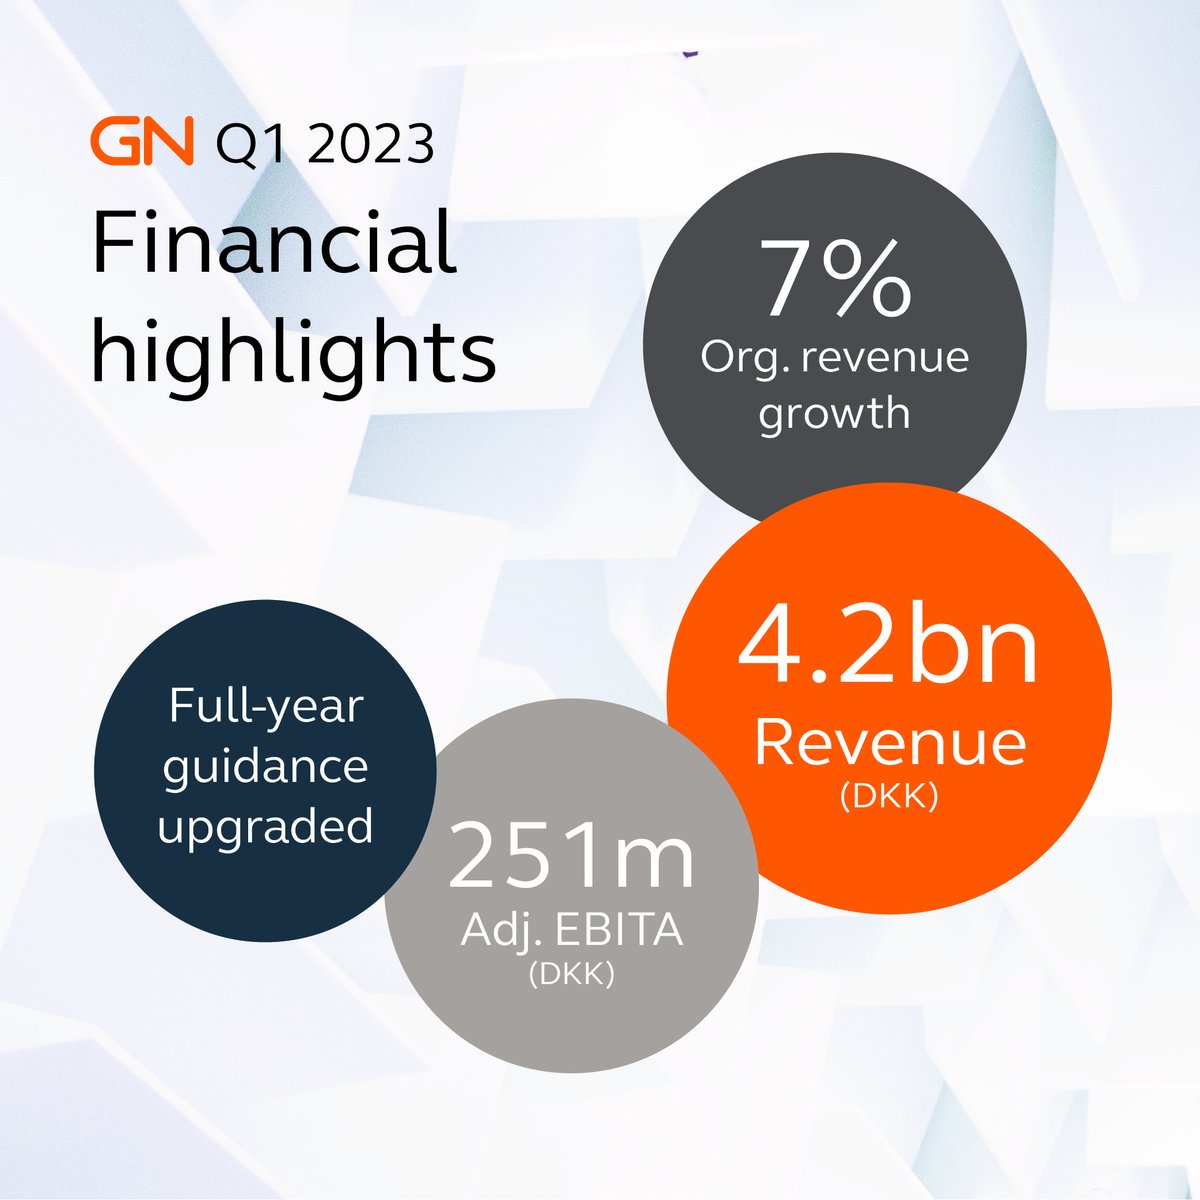 GN’s over 7,500 employees globally deliver an exceptionally strong first quarter.

We are in good shape across all our businesses and confident in our ability to deliver as one strong company.
 
#quarterlyresults #innovation #technology #bringingpeoplecloser #dkbiz